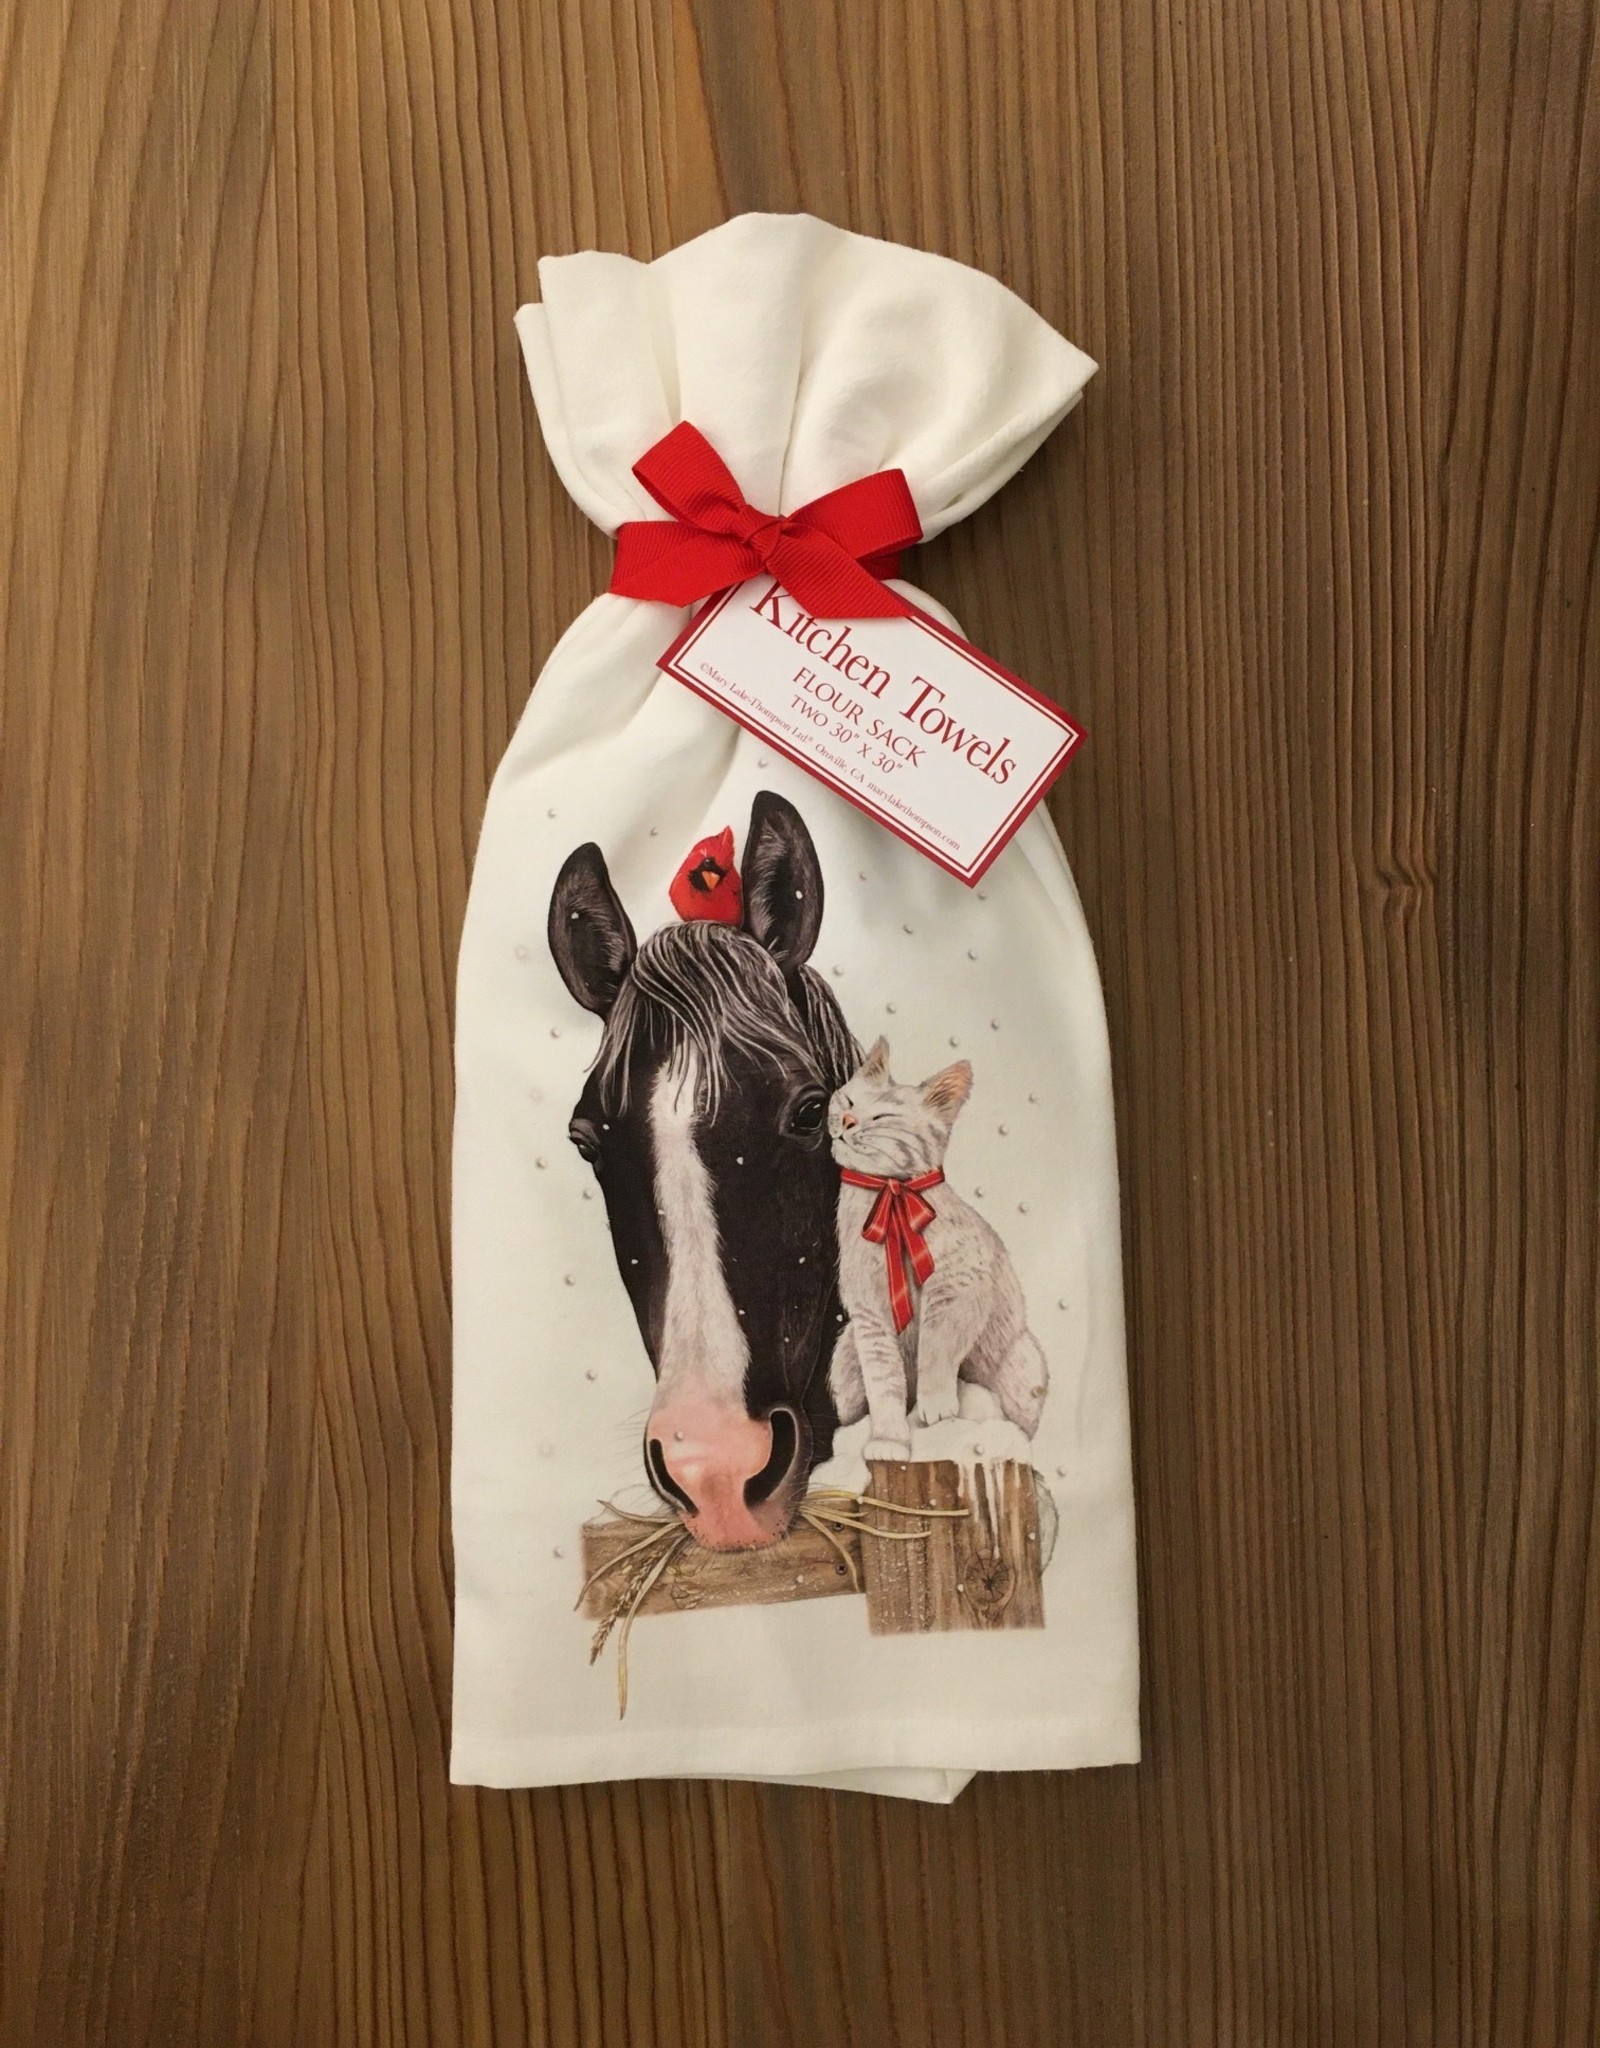 Horse And Cat Winter Towel - Set of 2